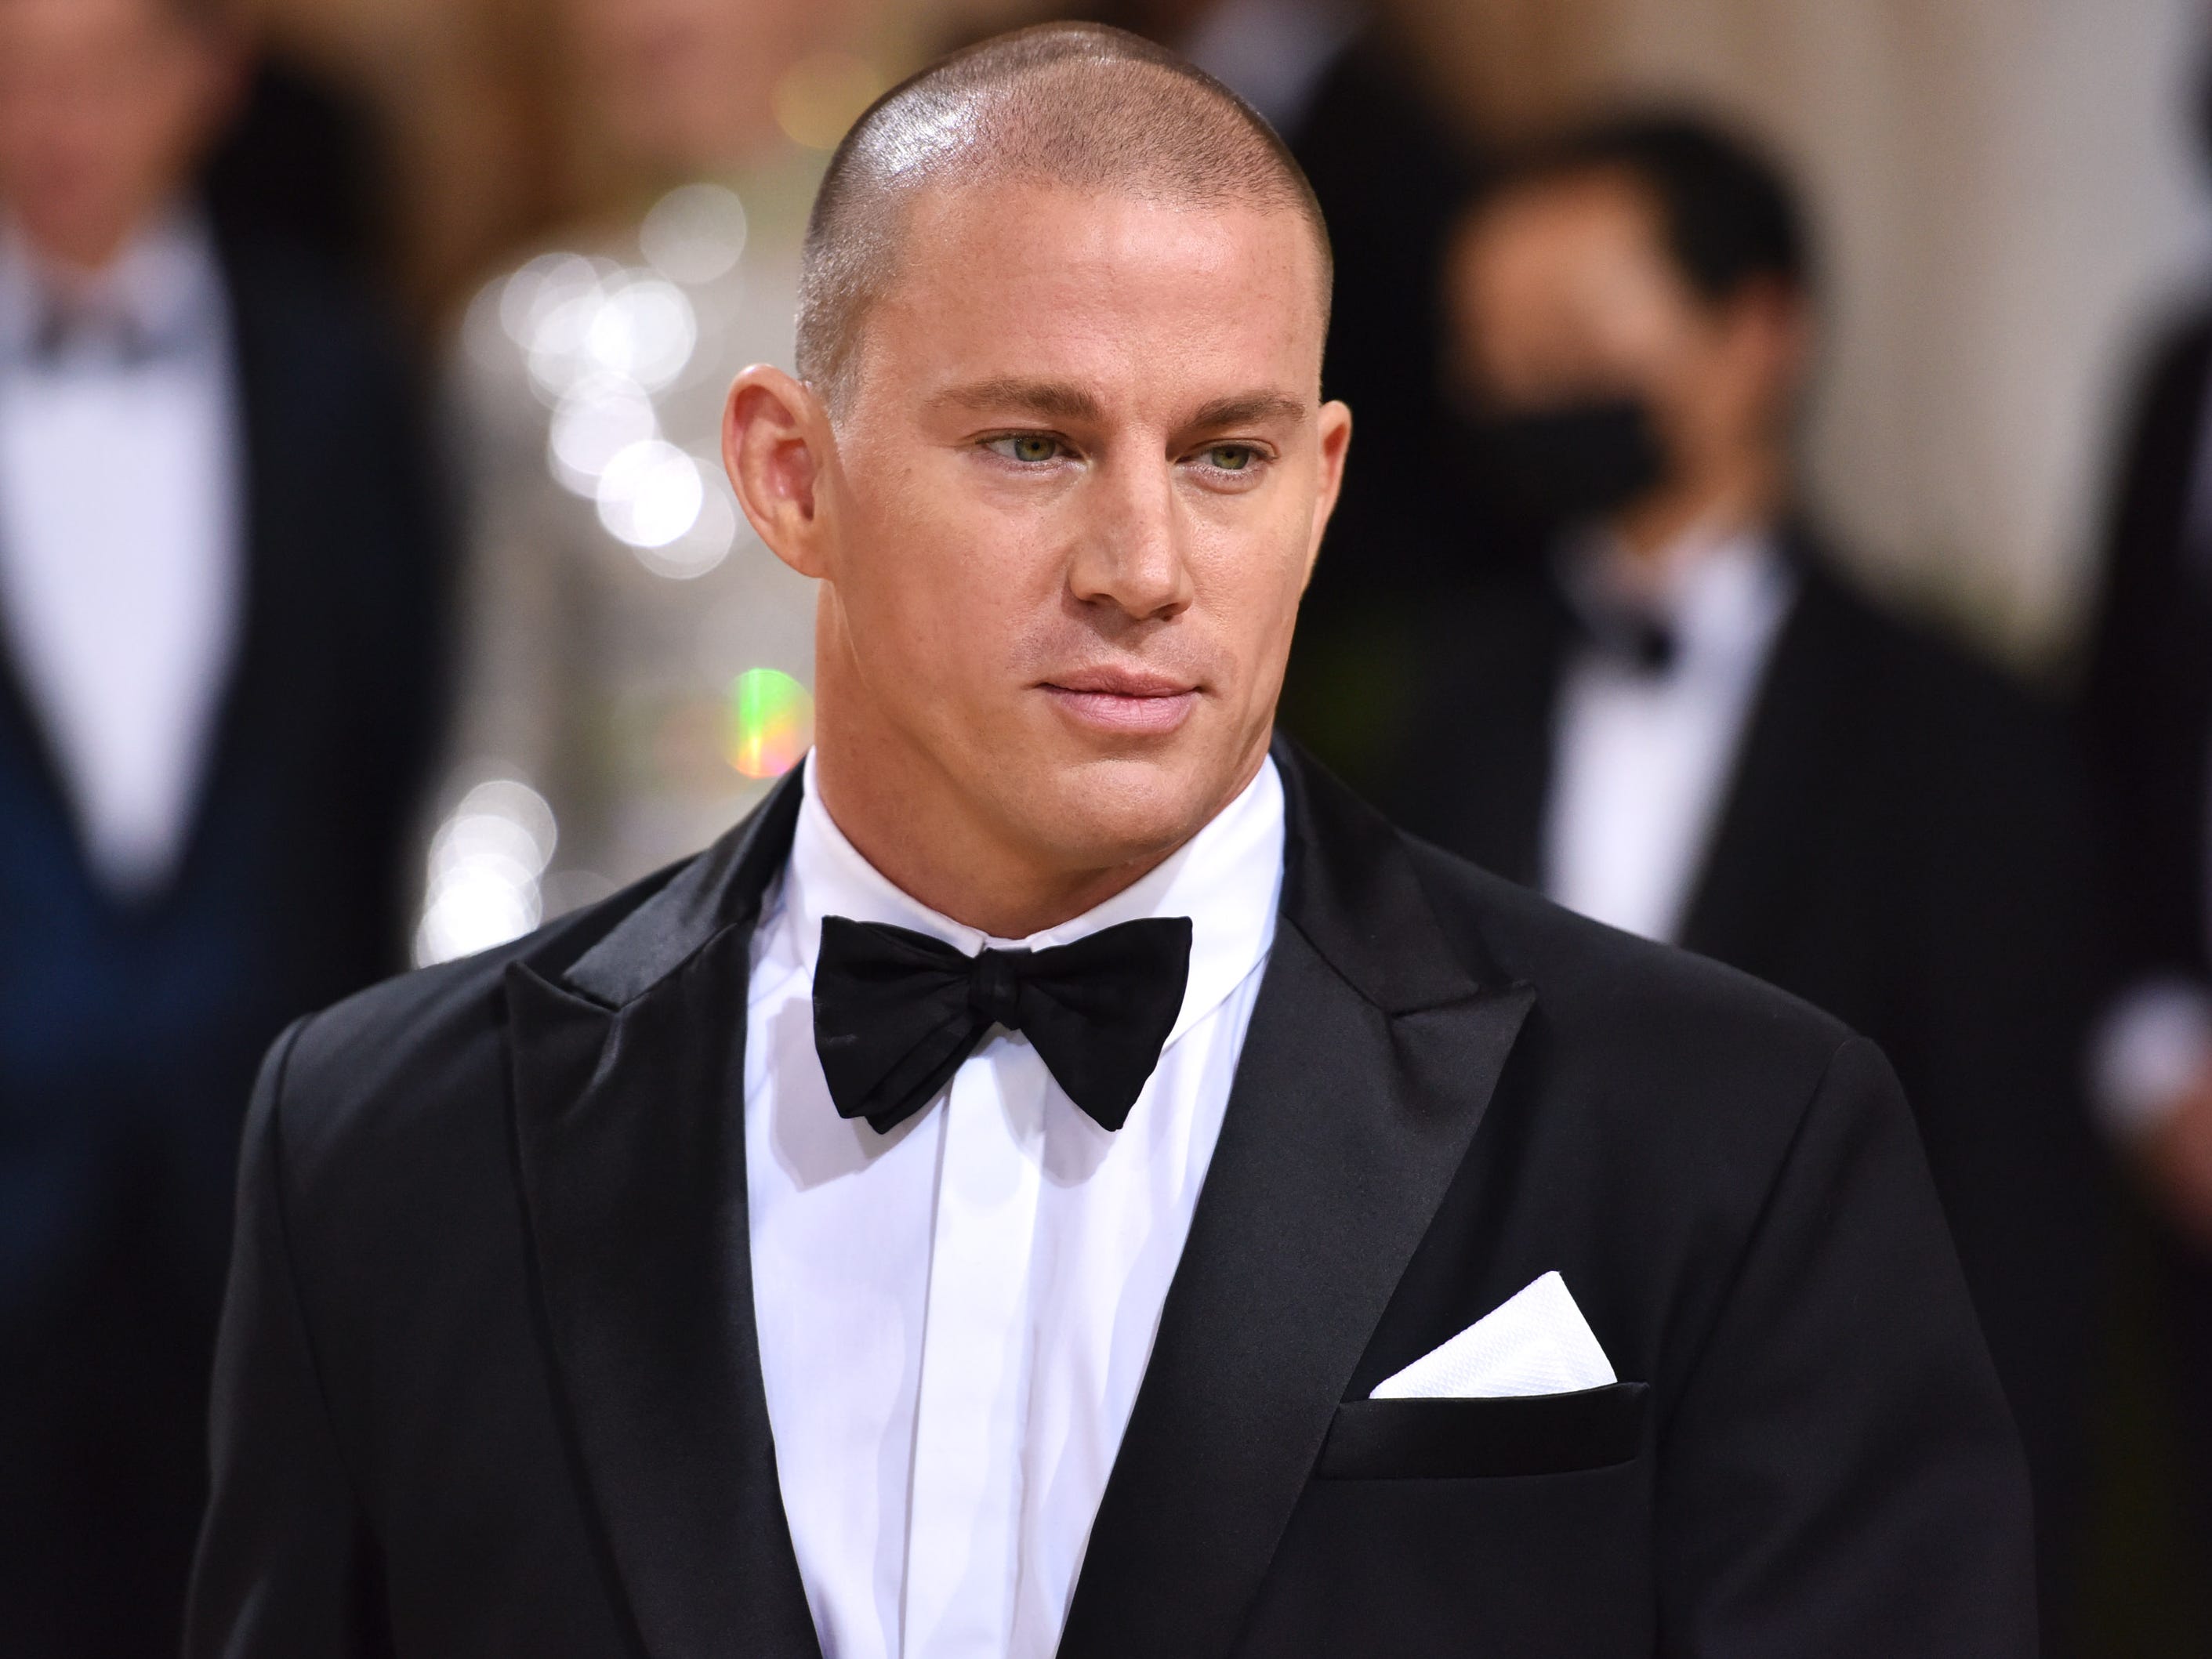 Channing Tatum nimmt am 13. September 2021 am Costume Institute Benefit – In America: A Lexicon of Fashion im Metropolitan Museum of Art in New York City teil.